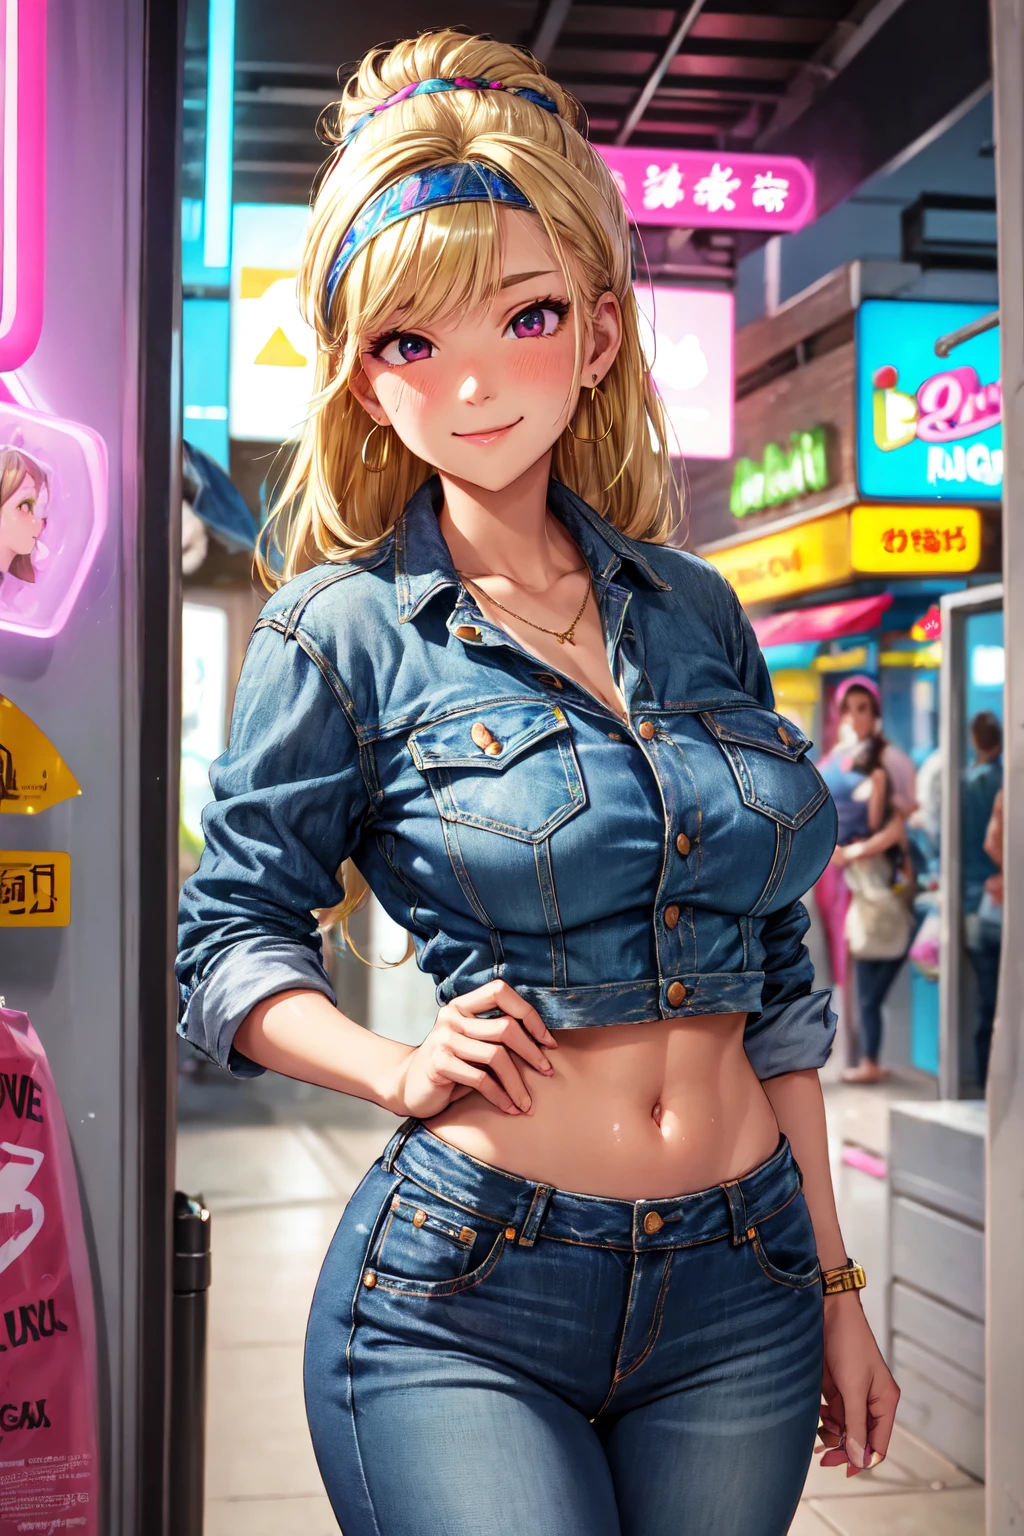 (high quality, High resolution, Finer details), Retro Fashion, Neon Light, outfits from the 80's, High Waist Jeans, colorful pattern, Patchwork Denim Jacket, Funky Earrings, Stylish headband, alone, Curvy Women, blonde, Big Hair, Slicked back hair, Sparkling eyes, (fine grain:1.2), (Bright makeup:0.2), smile, blush, Sweat, Oily skin, Shallow depth of field,Abdominal muscles,Muscular
